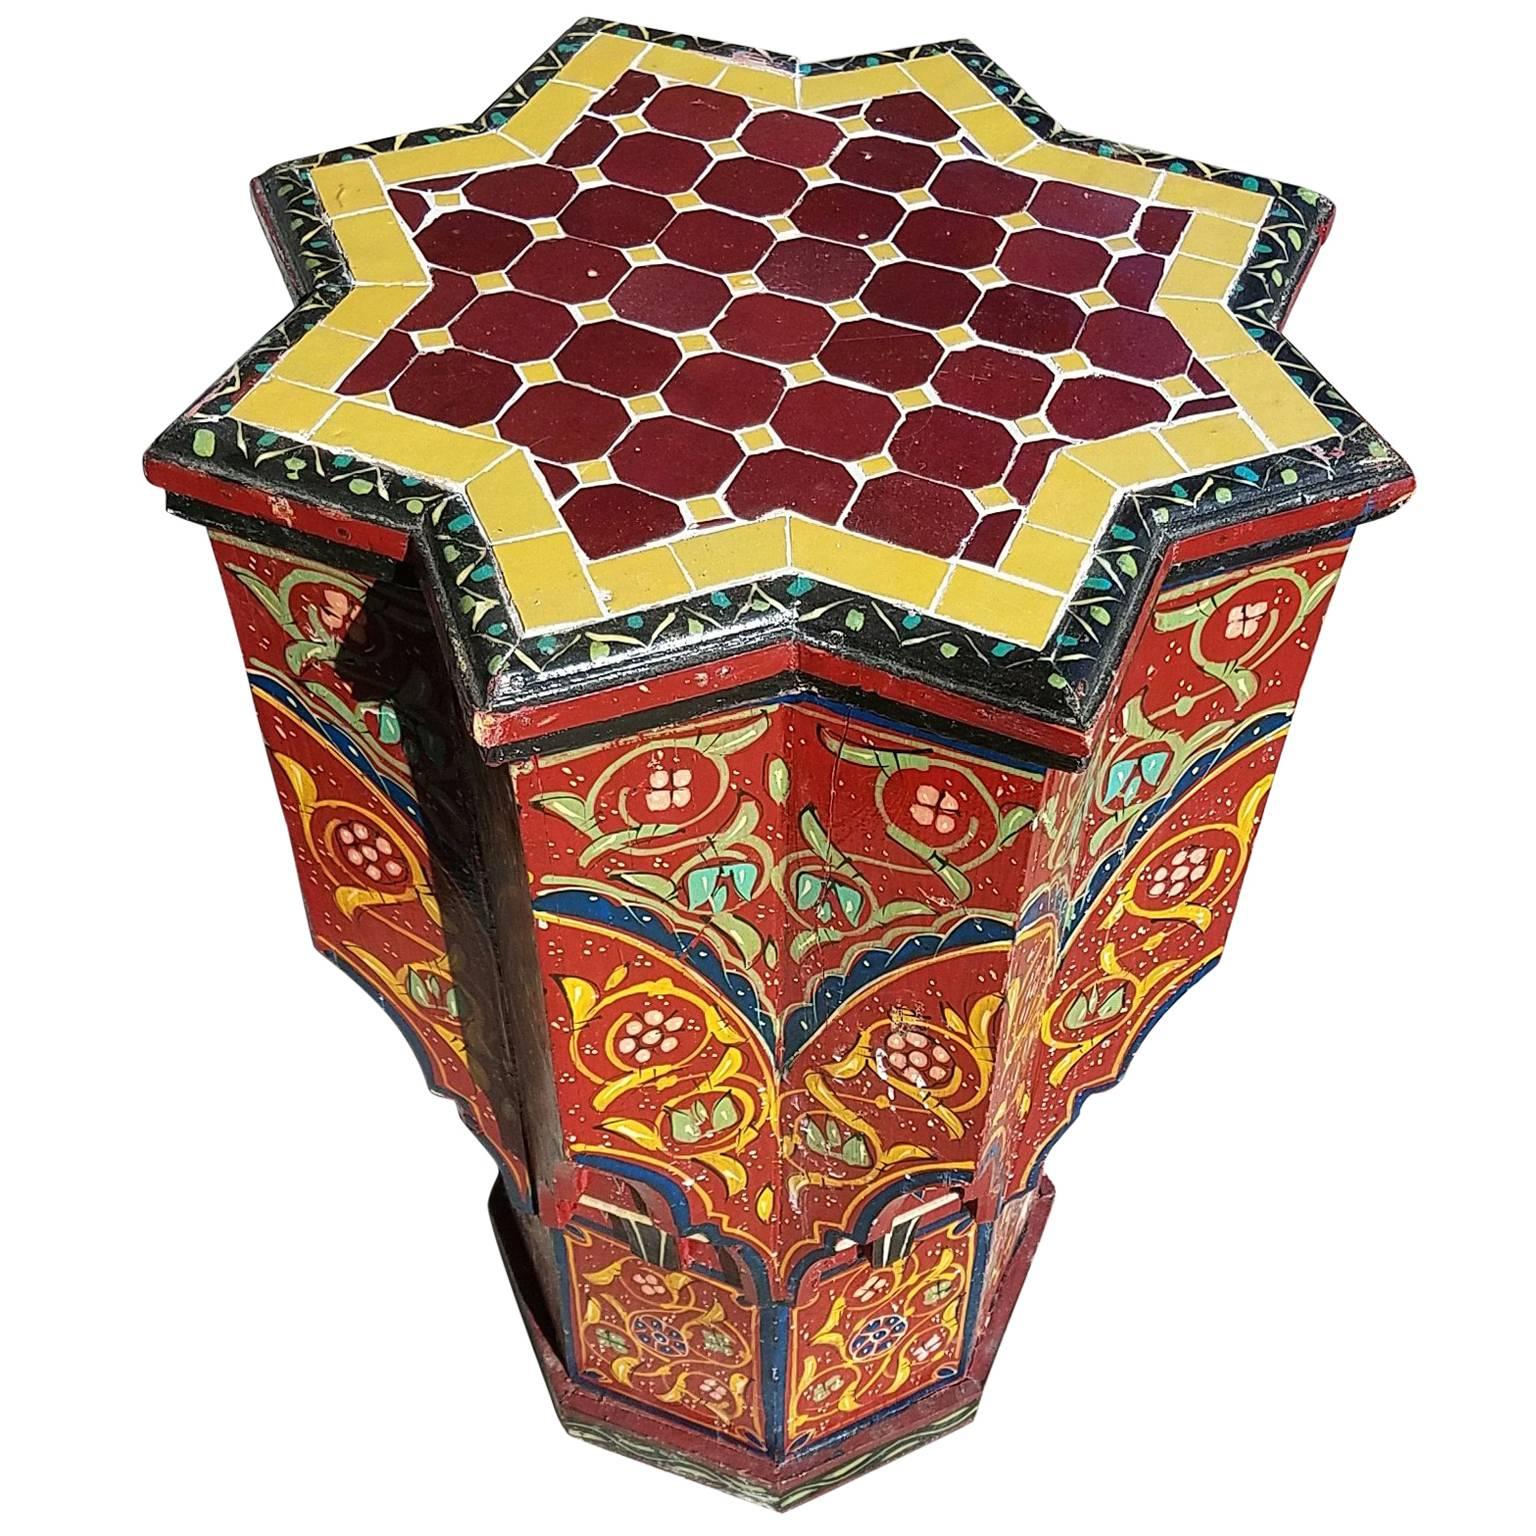 Maura All Painted Moroccan Side Table, Mosaic Top